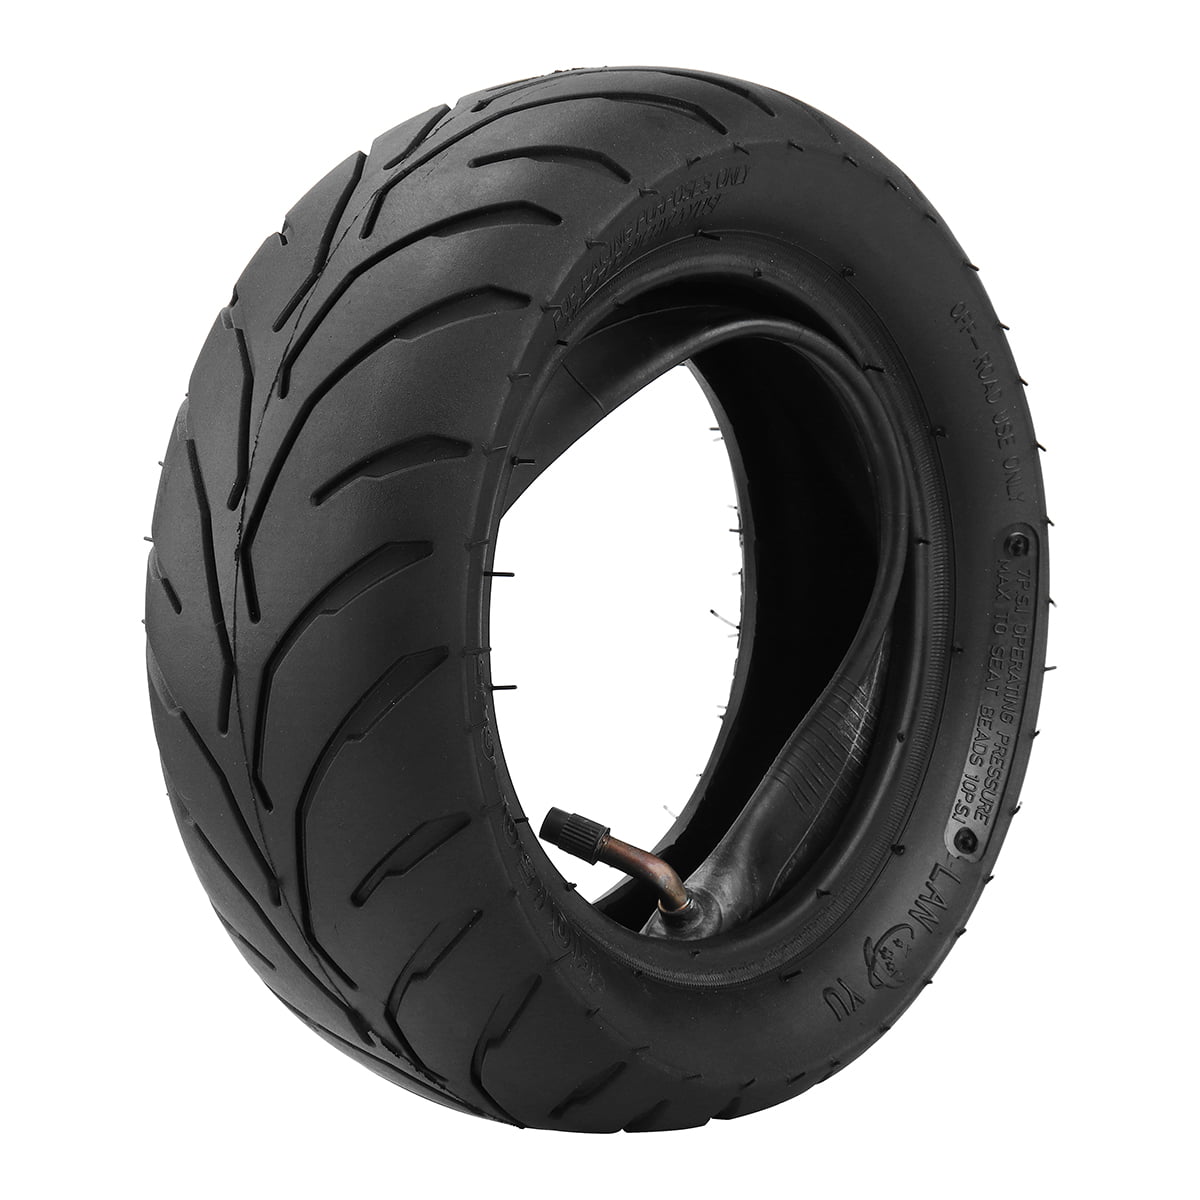 Hyssk 110/50-6.5 Tubeless Tire and Inner Tube for 49cc Pocket Rocket Bike Rear Back Tire Product Upgraded 